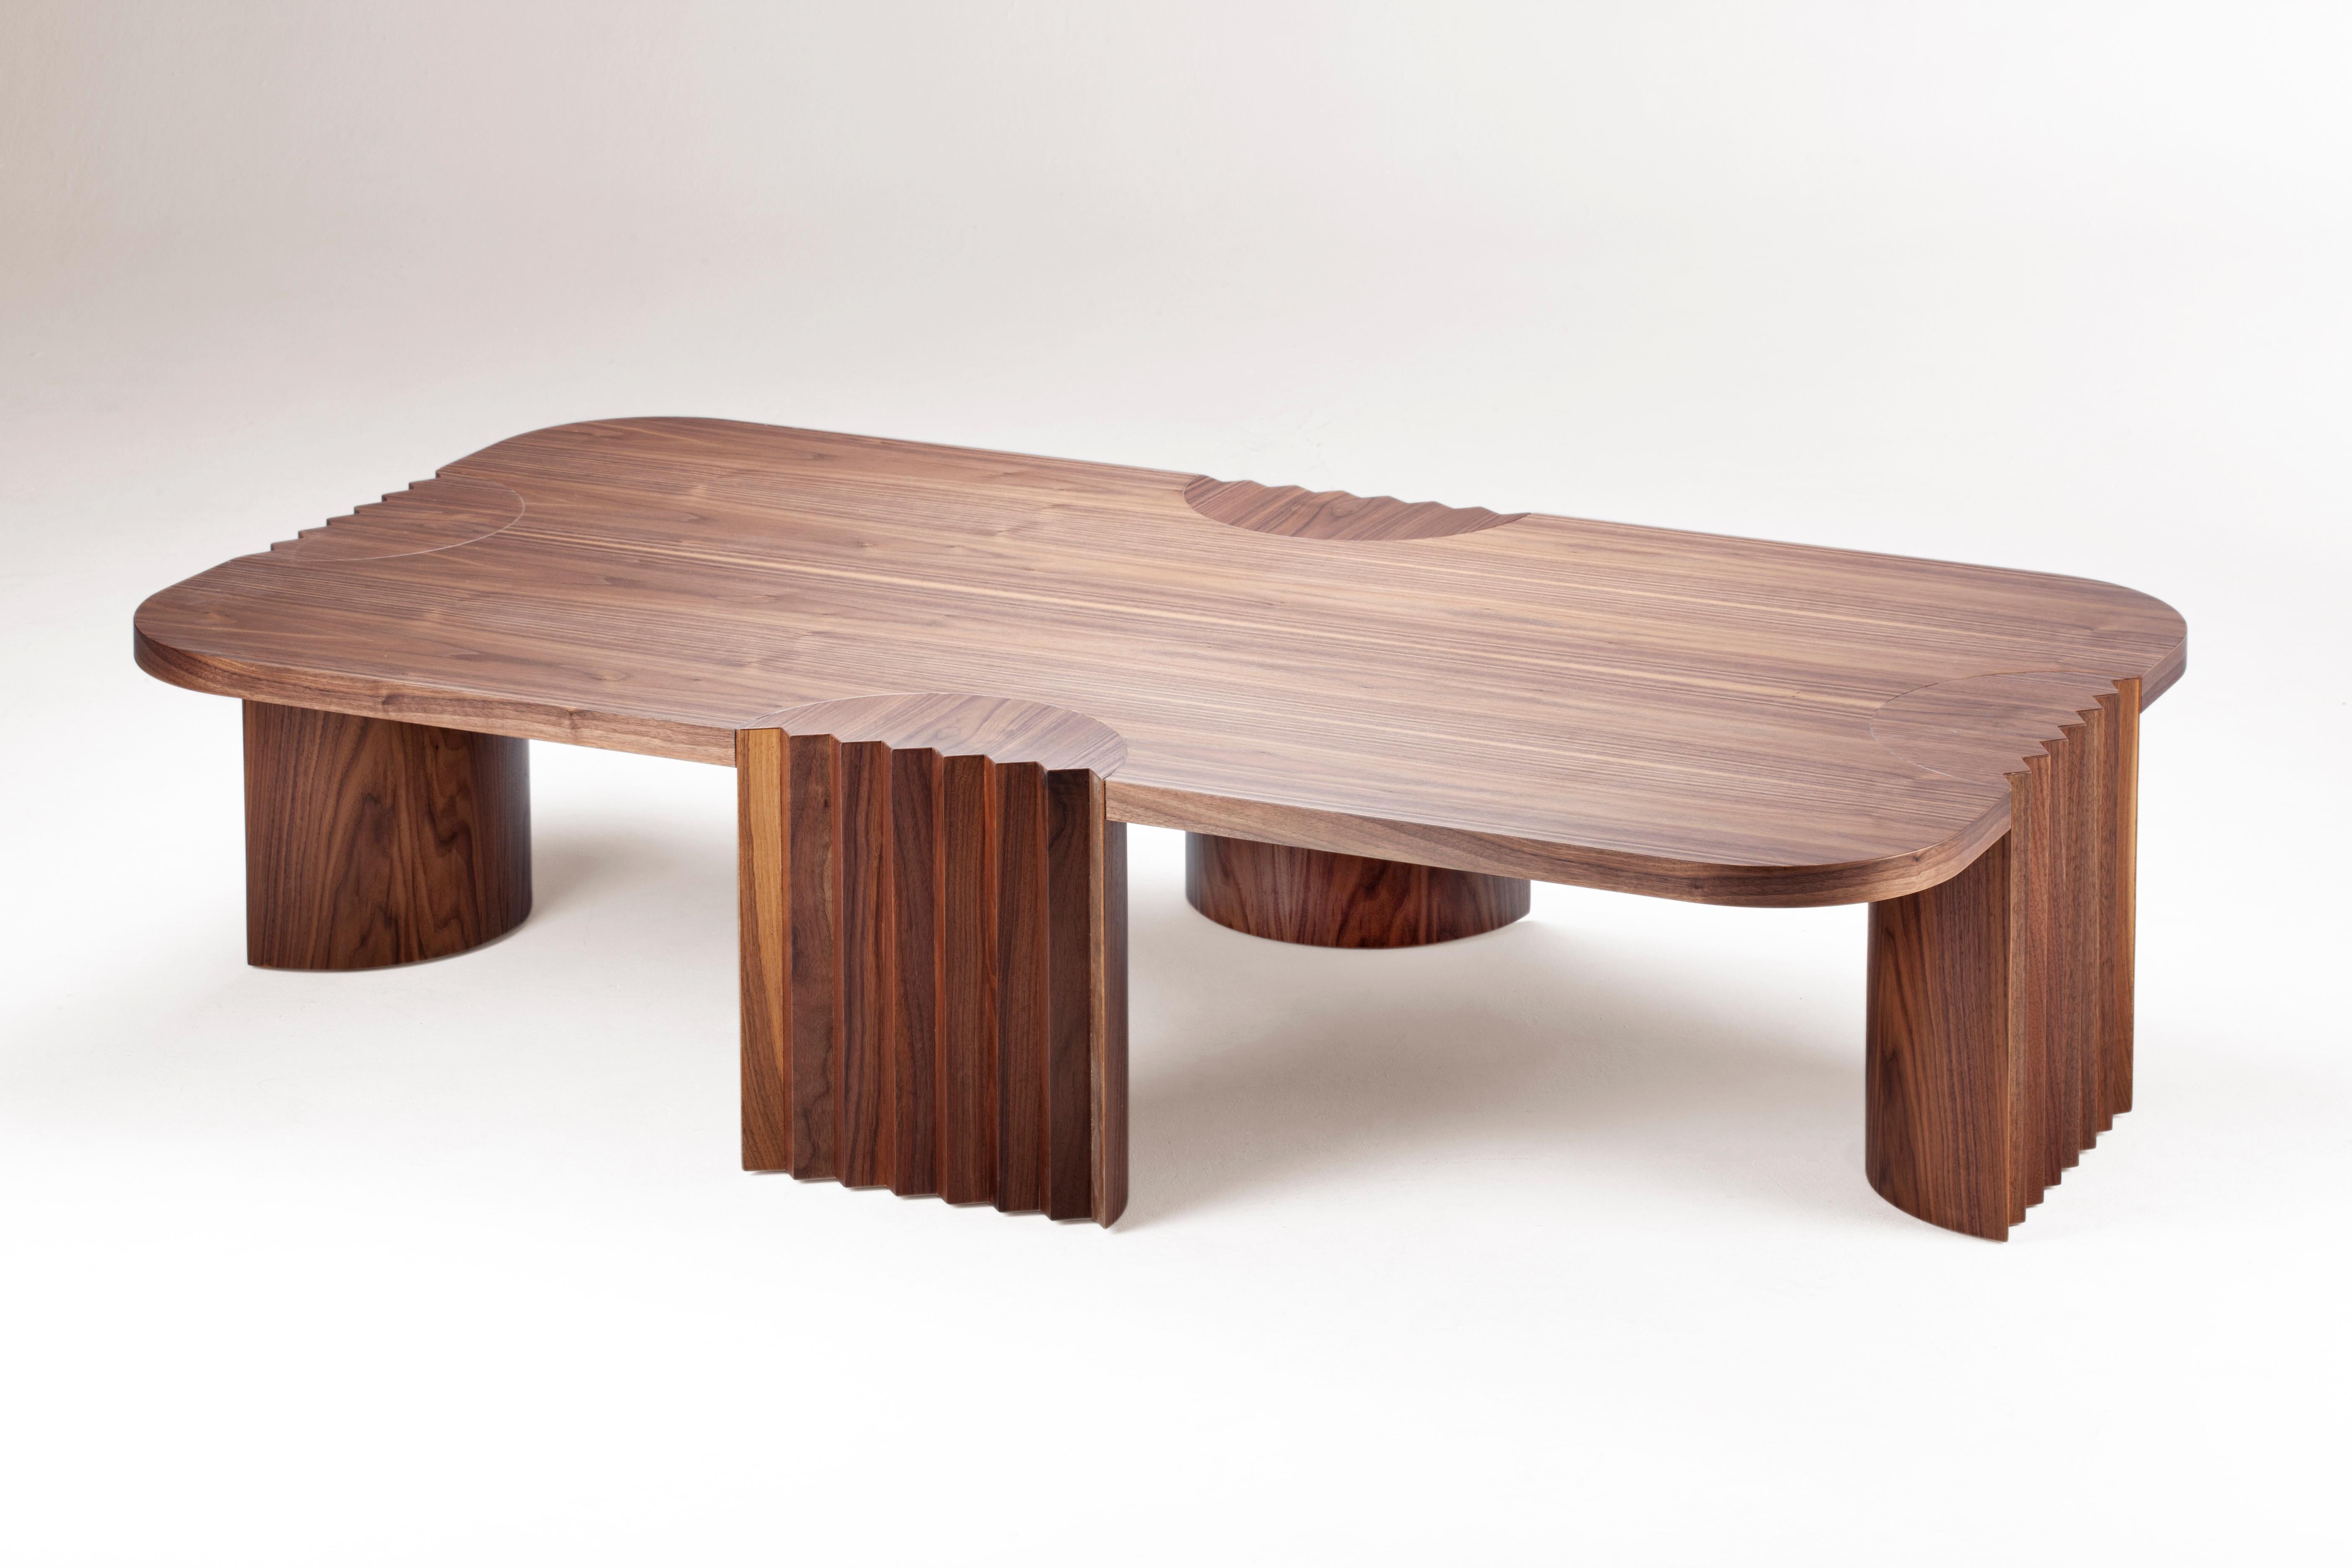 Unique walnut caravel center table by Collector
Dimensions: W 150 x D 80 x H 35 cm
Materials: Fabric, walnut wood 
Other materials available.

The Collector brand aims to be part of the daily life by fusing furniture to our home routine and